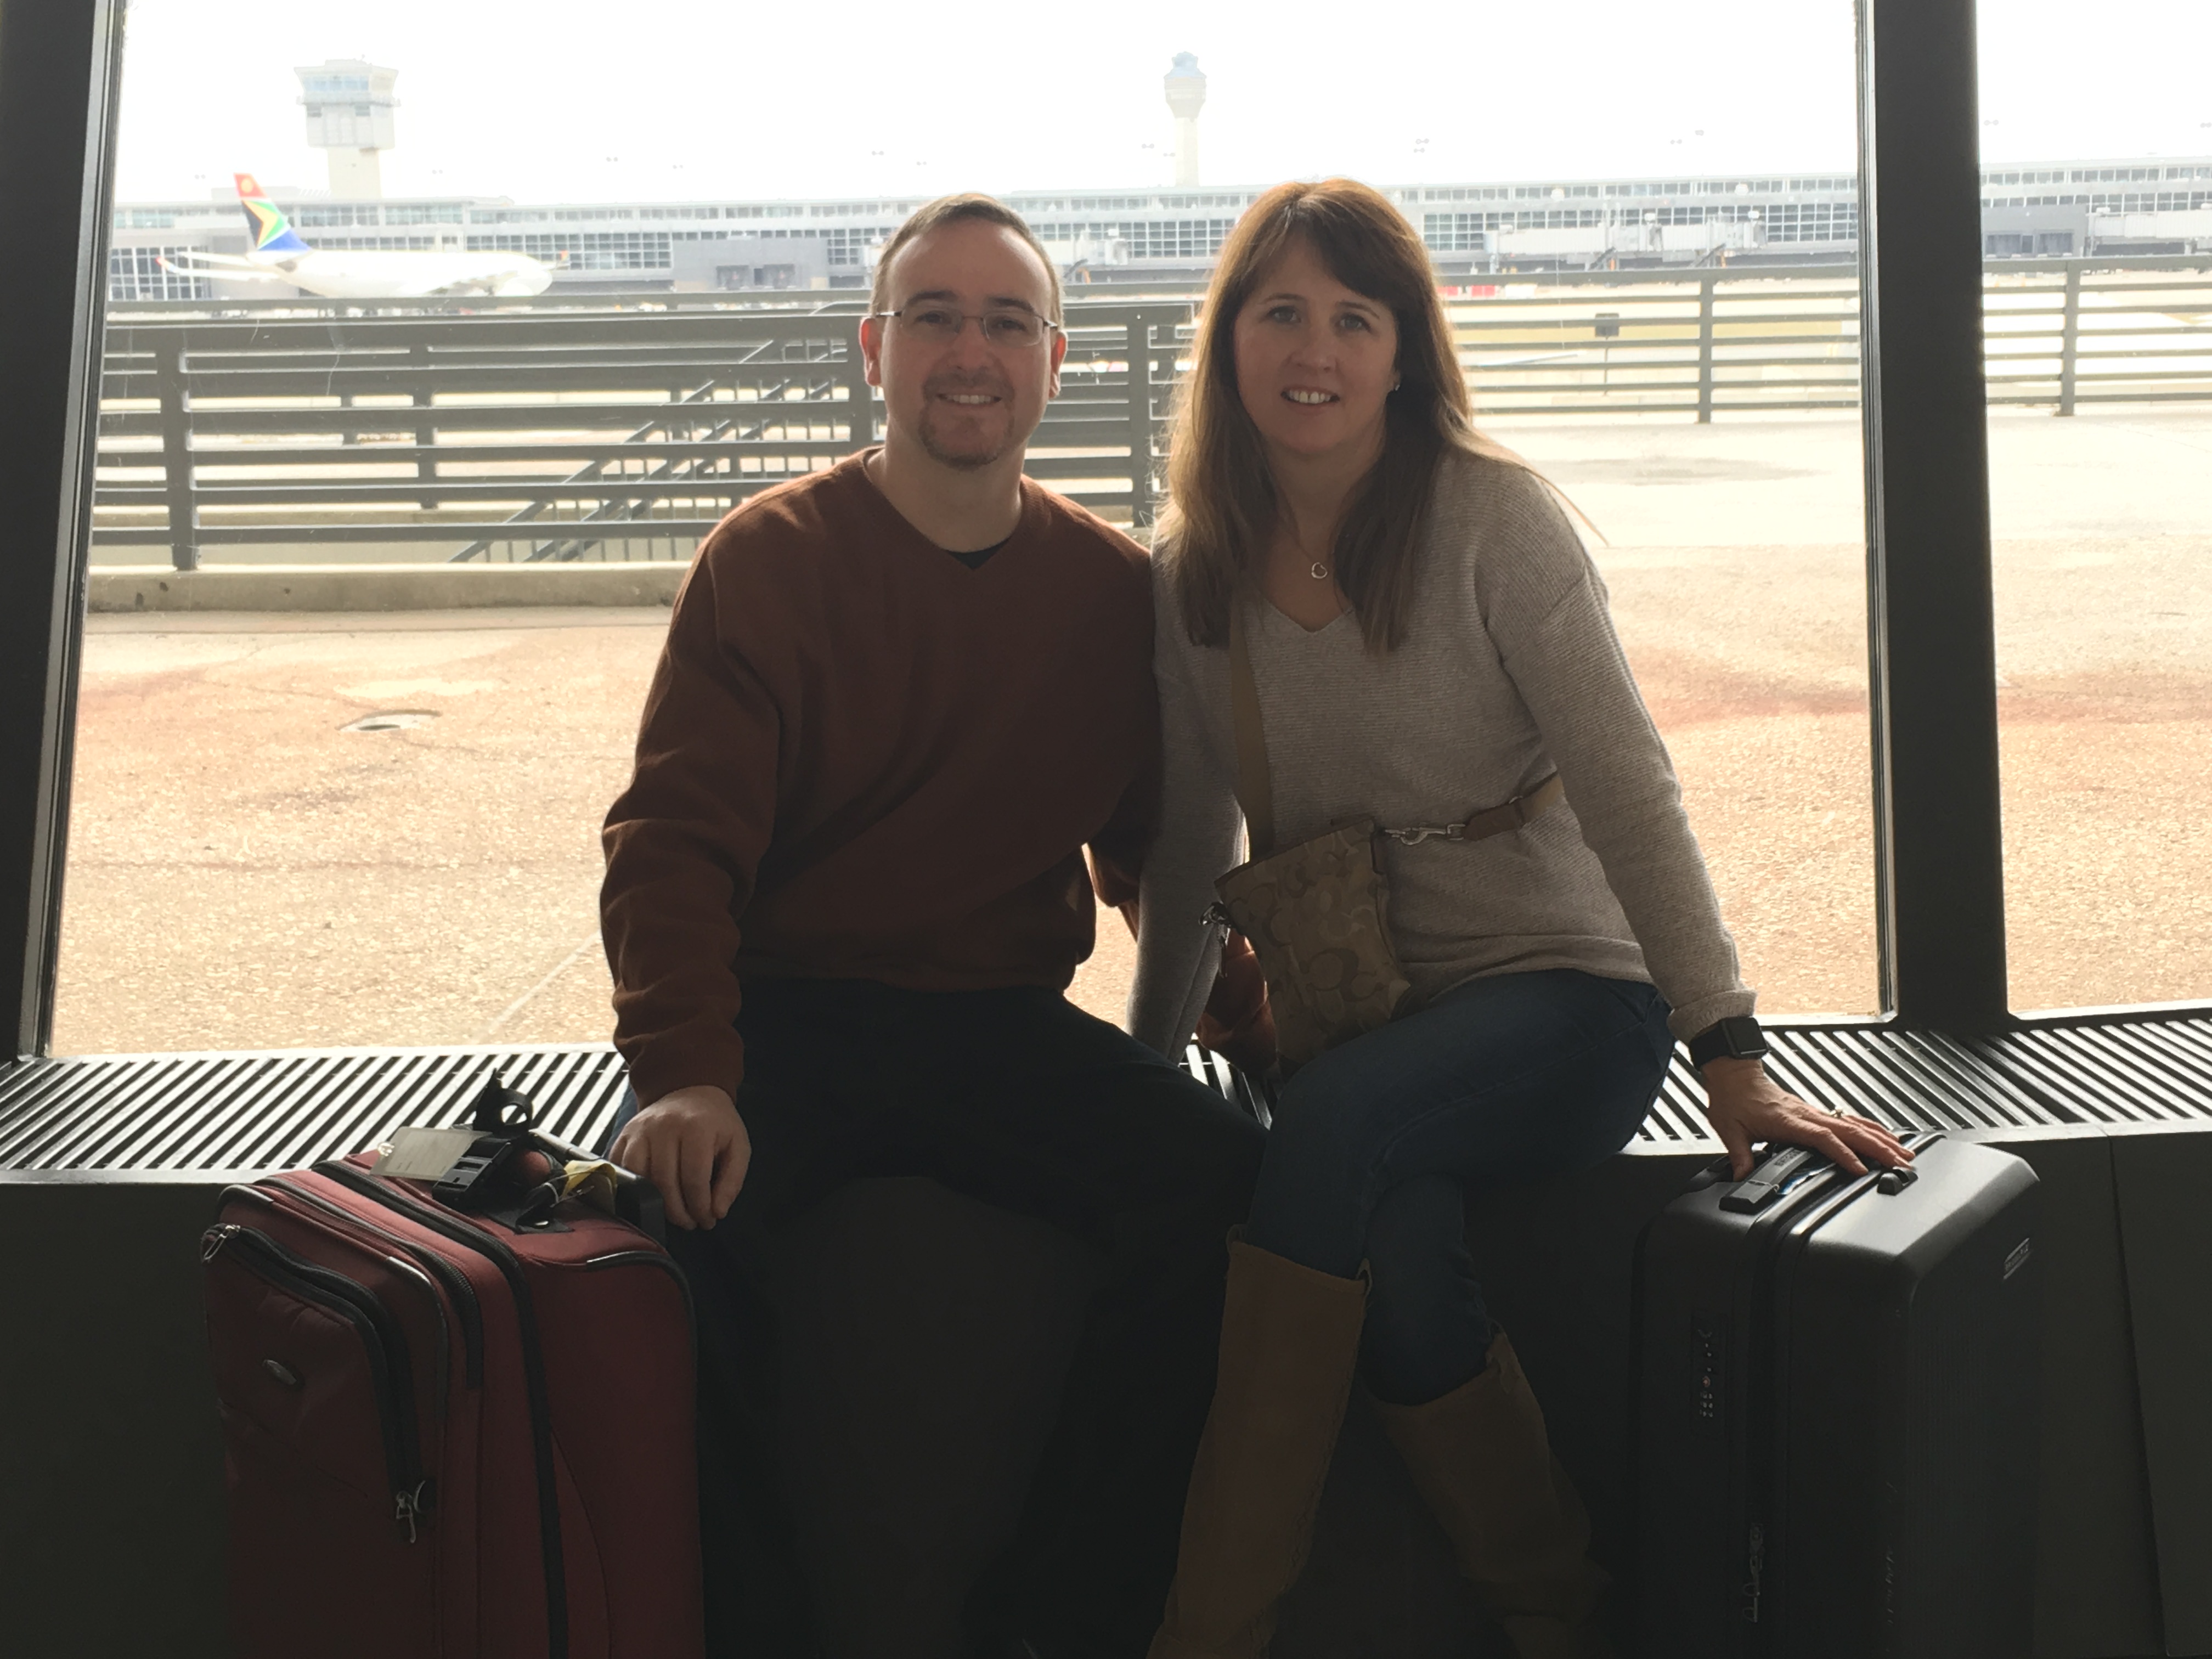 a man and woman sitting on luggage